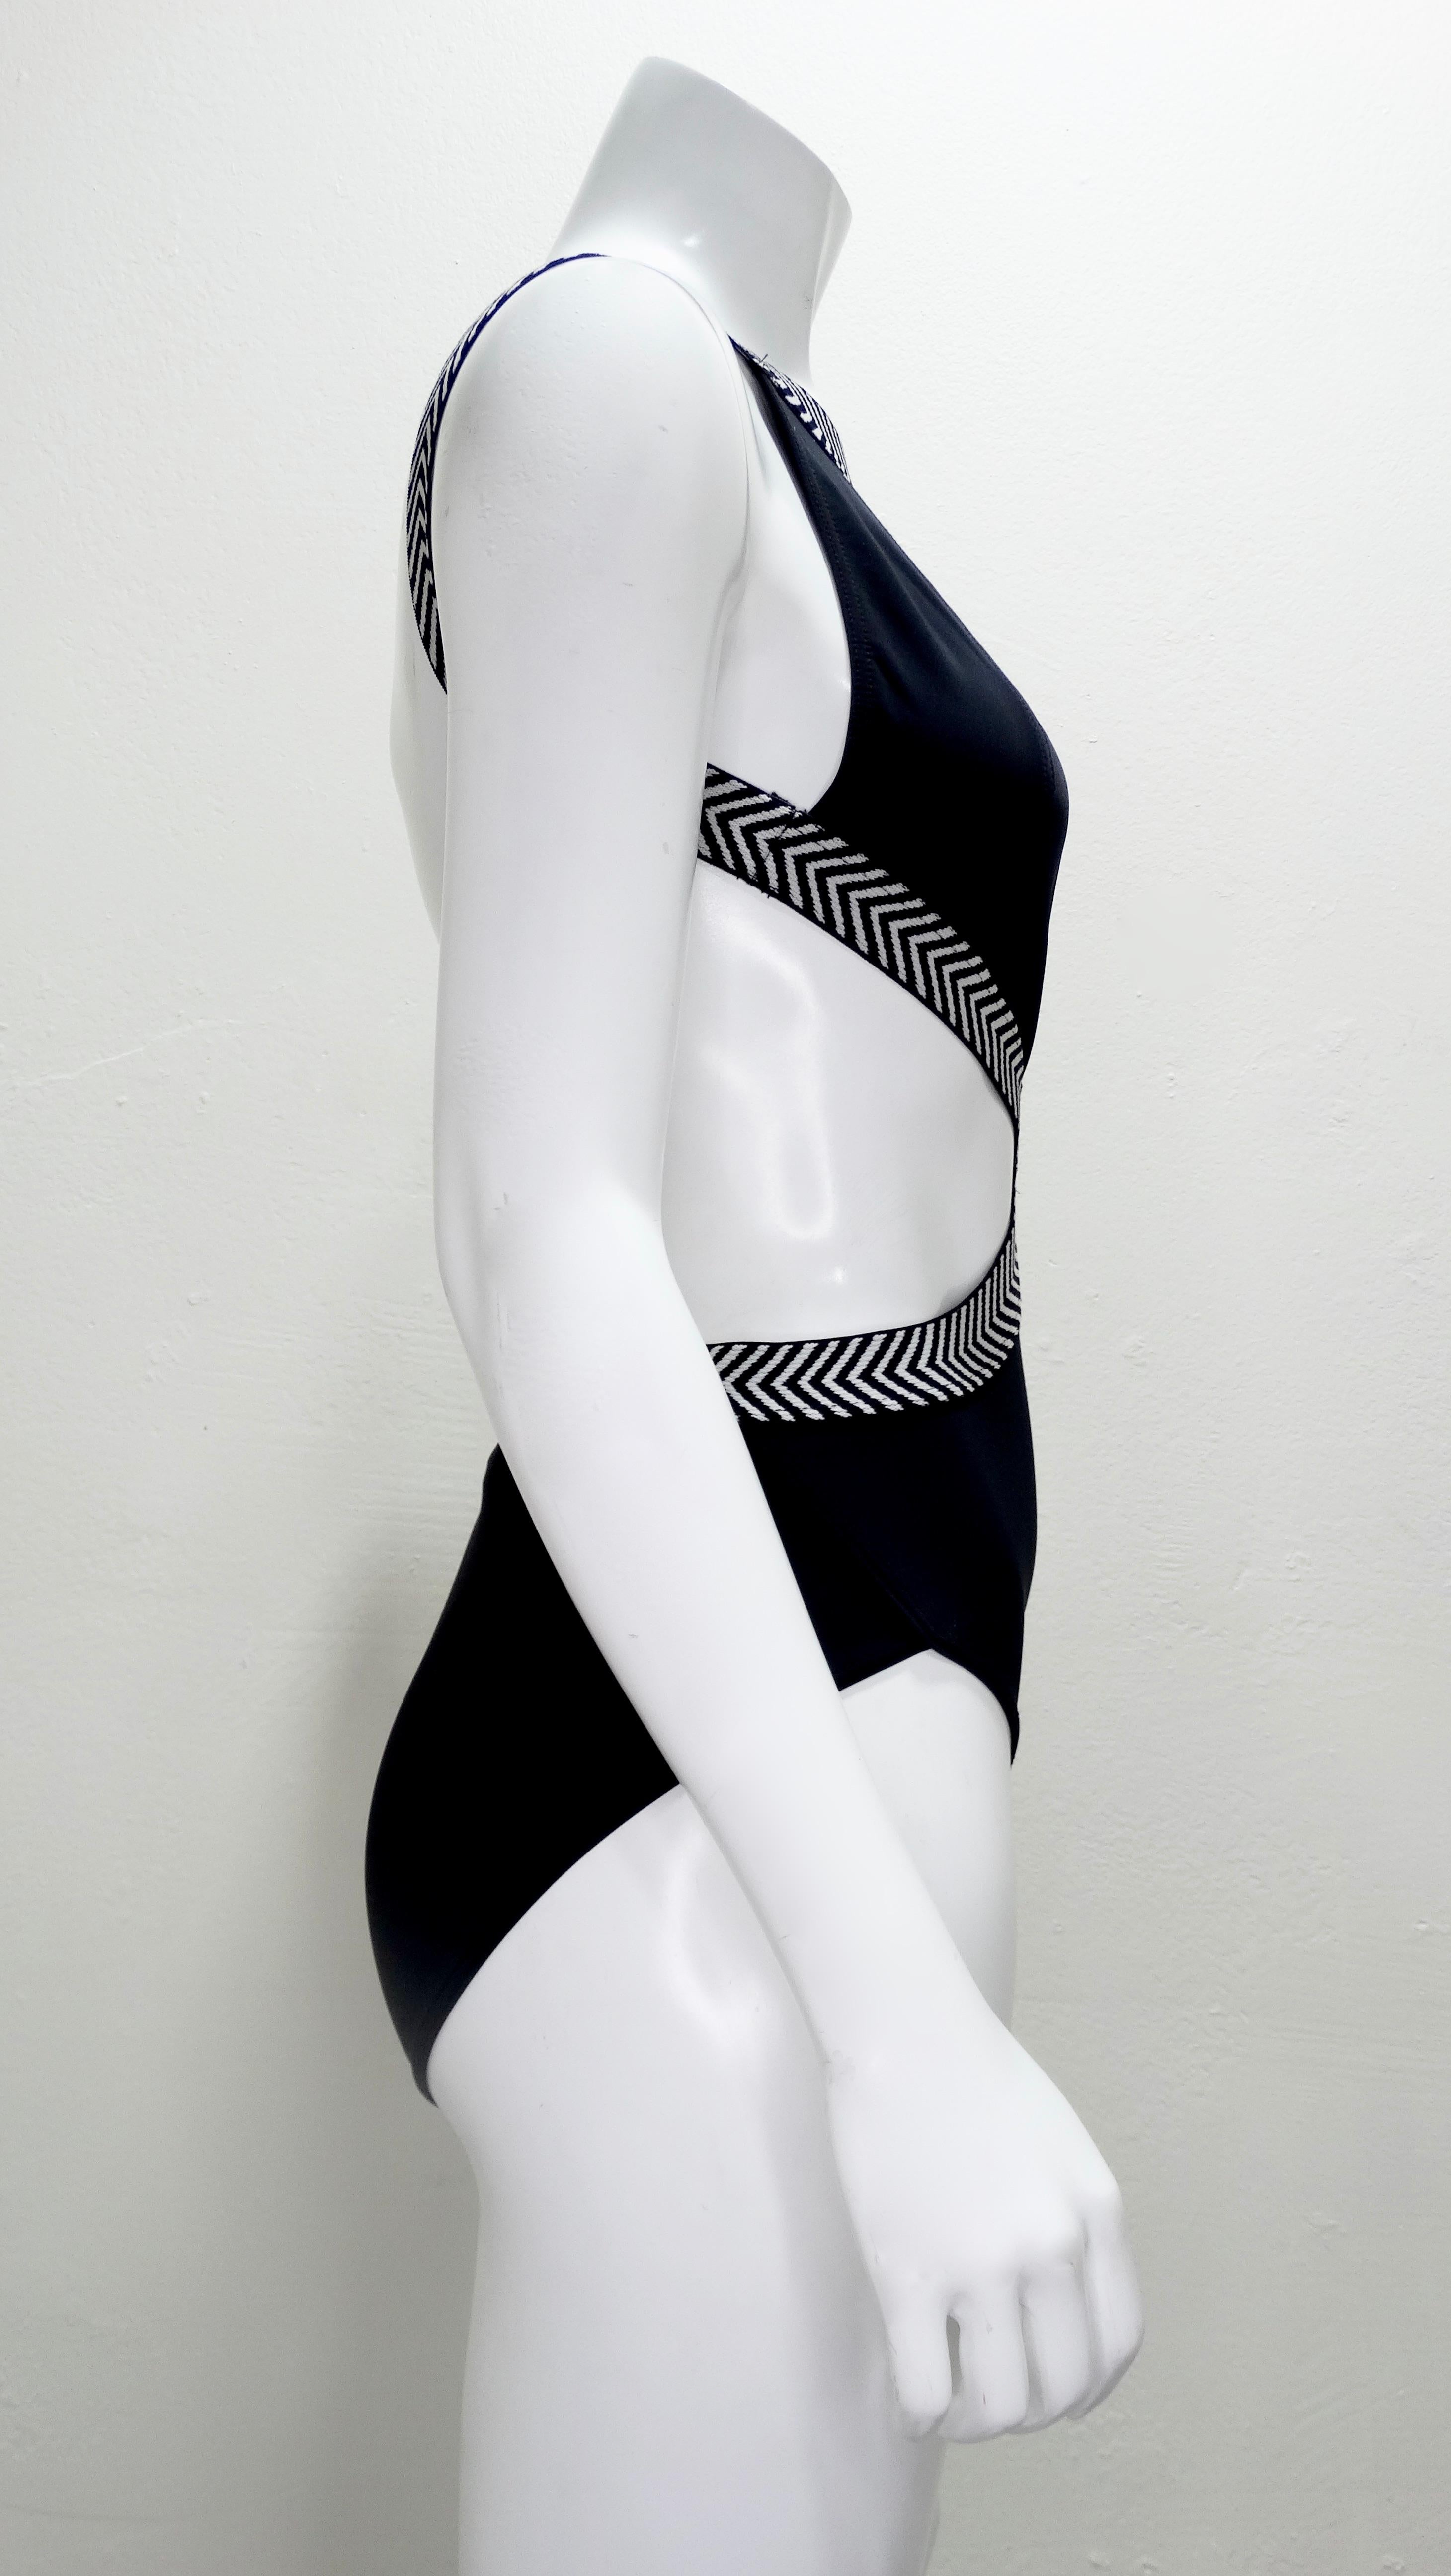 Be beach ready at all times with this adorable Herve Leger one piece swimsuit! Circa 1990s, this swimsuit features a black and white elastic trim with cut outs and an open back. Perfect for the pool or the beach, this swimsuit will pair perfectly